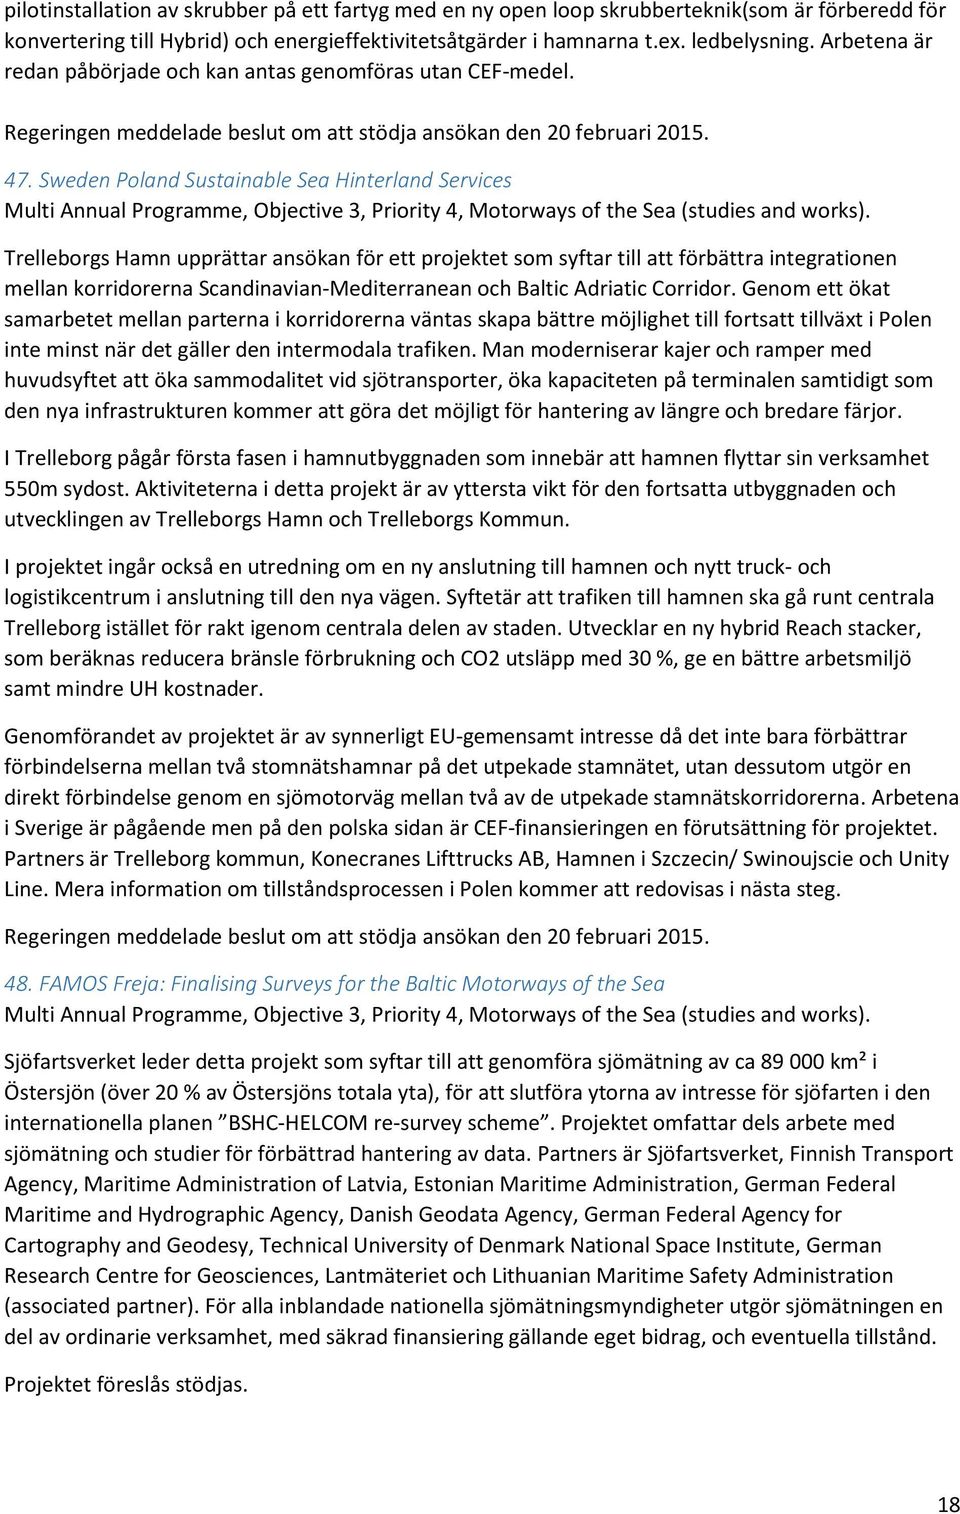 Sweden Poland Sustainable Sea Hinterland Services Multi Annual Programme, Objective 3, Priority 4, Motorways of the Sea (studies and works).